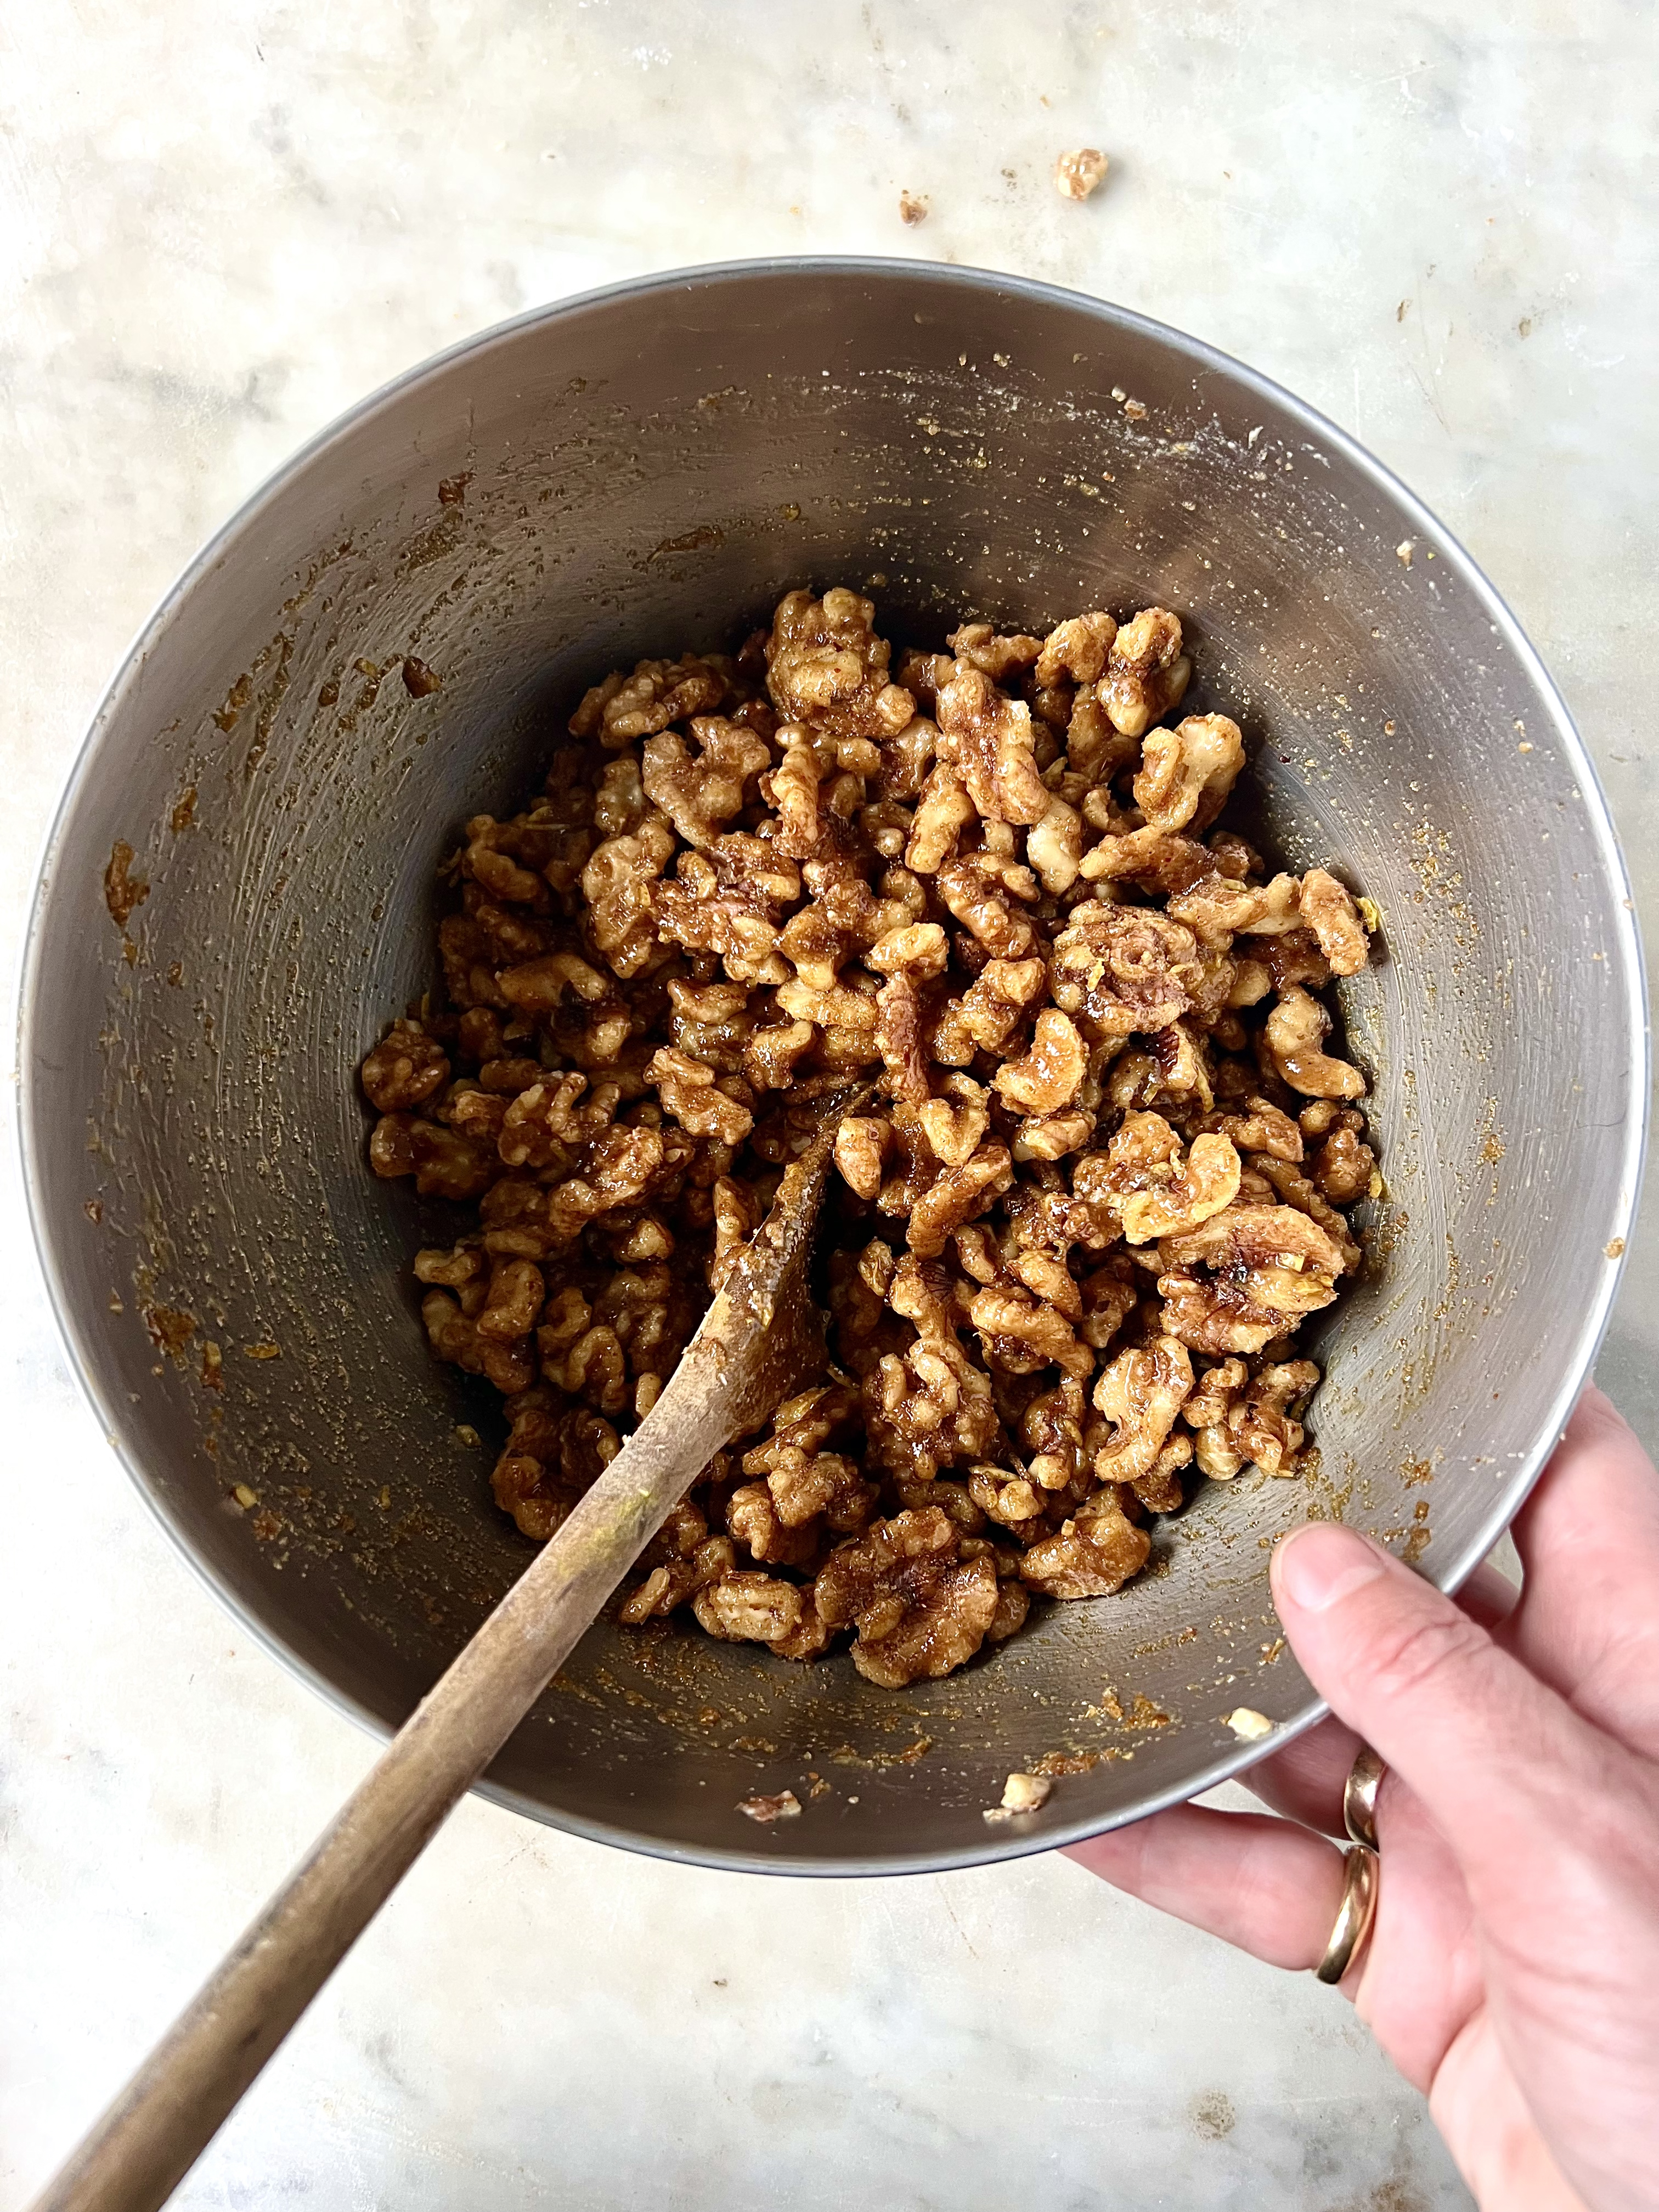 Walnuts in a Bowl coasted with Brown Sugar Mixture